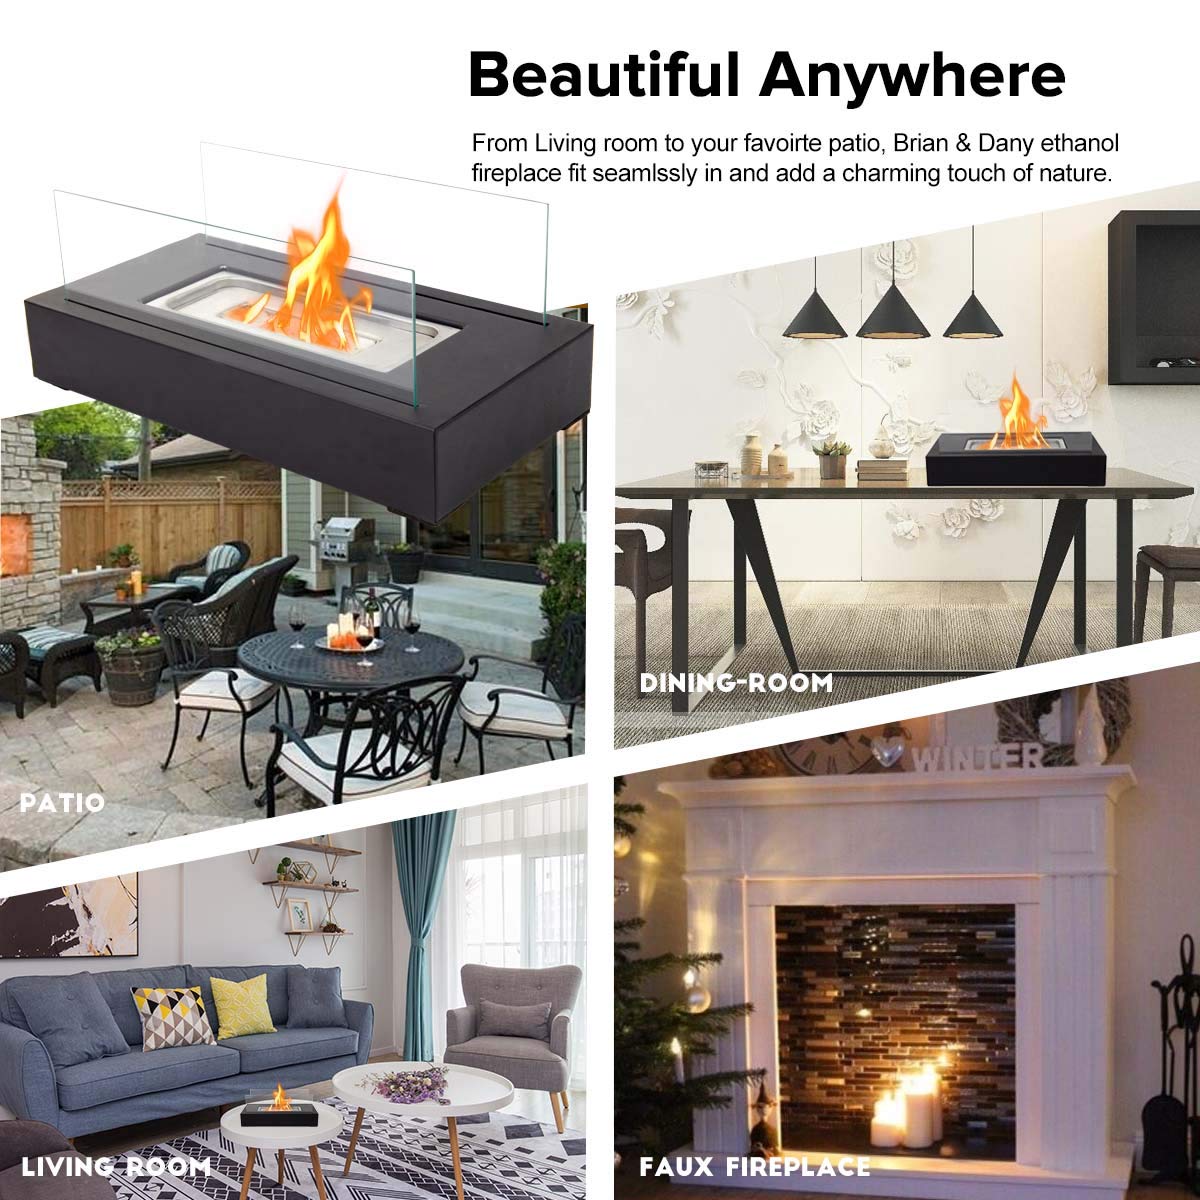 Portable Fireplace Big Lots Beautiful Brian & Dany Ventless Tabletop Portable Fire Bowl Pot Bio Ethanol Fireplace Indoor Outdoor Fire Pit In Black W Fire Killer and Funnel